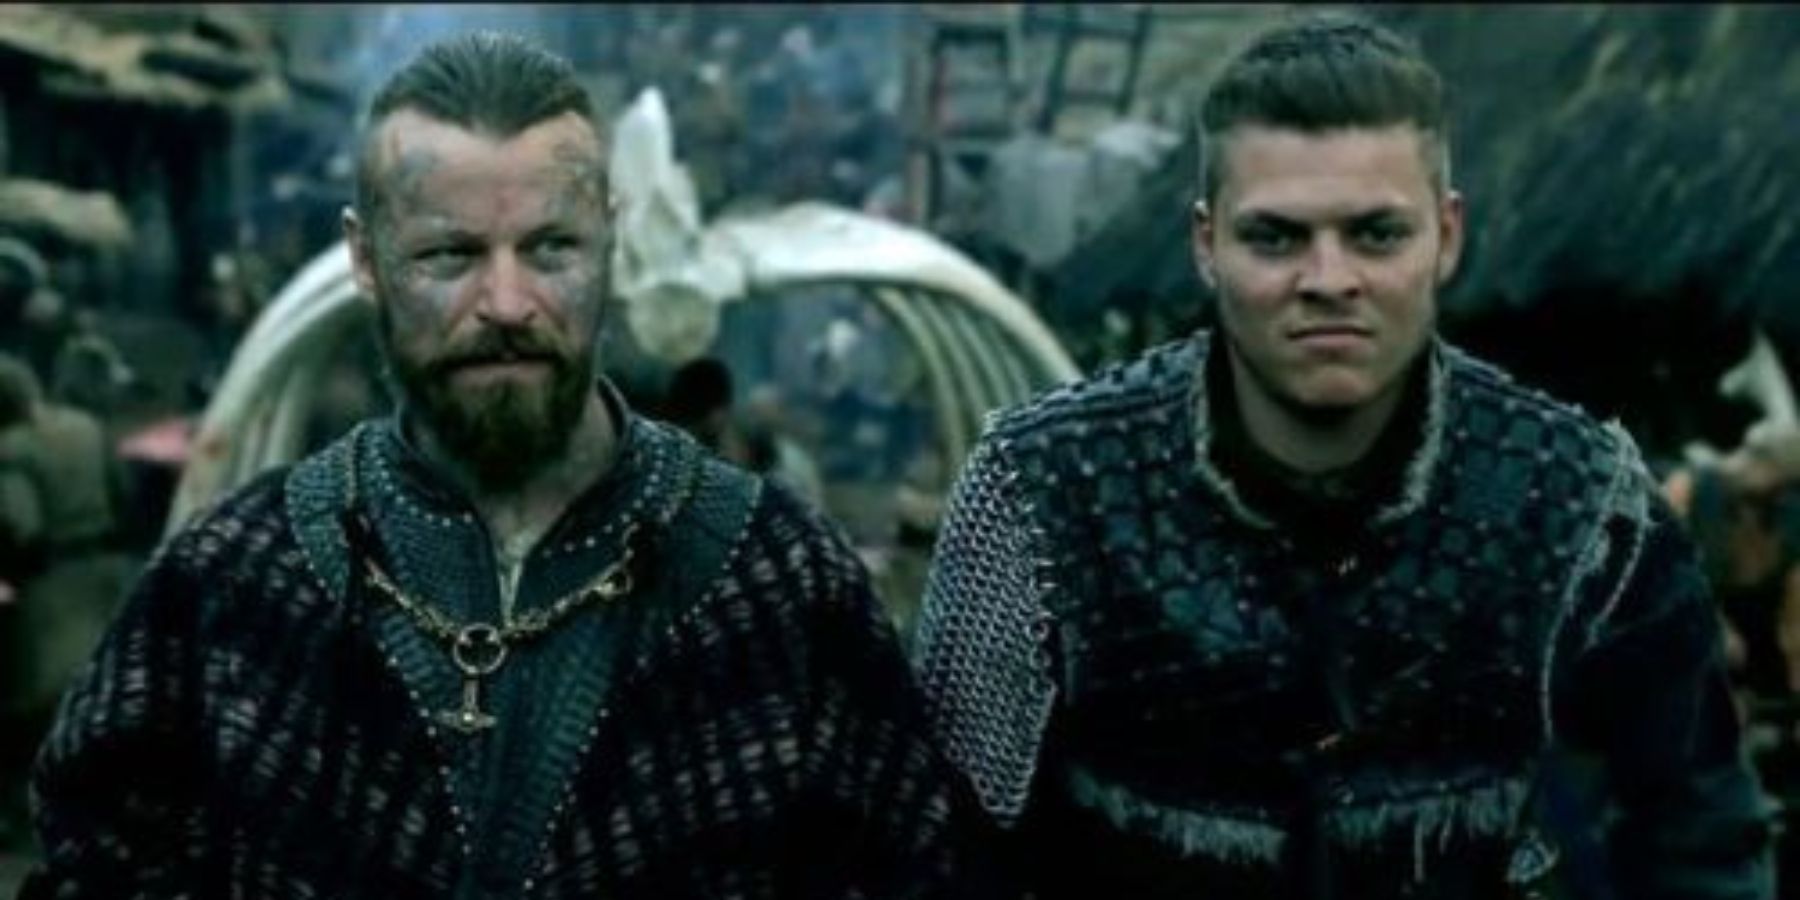 Harald and Ivar from Vikings looking determined and stern in outdoor scene.